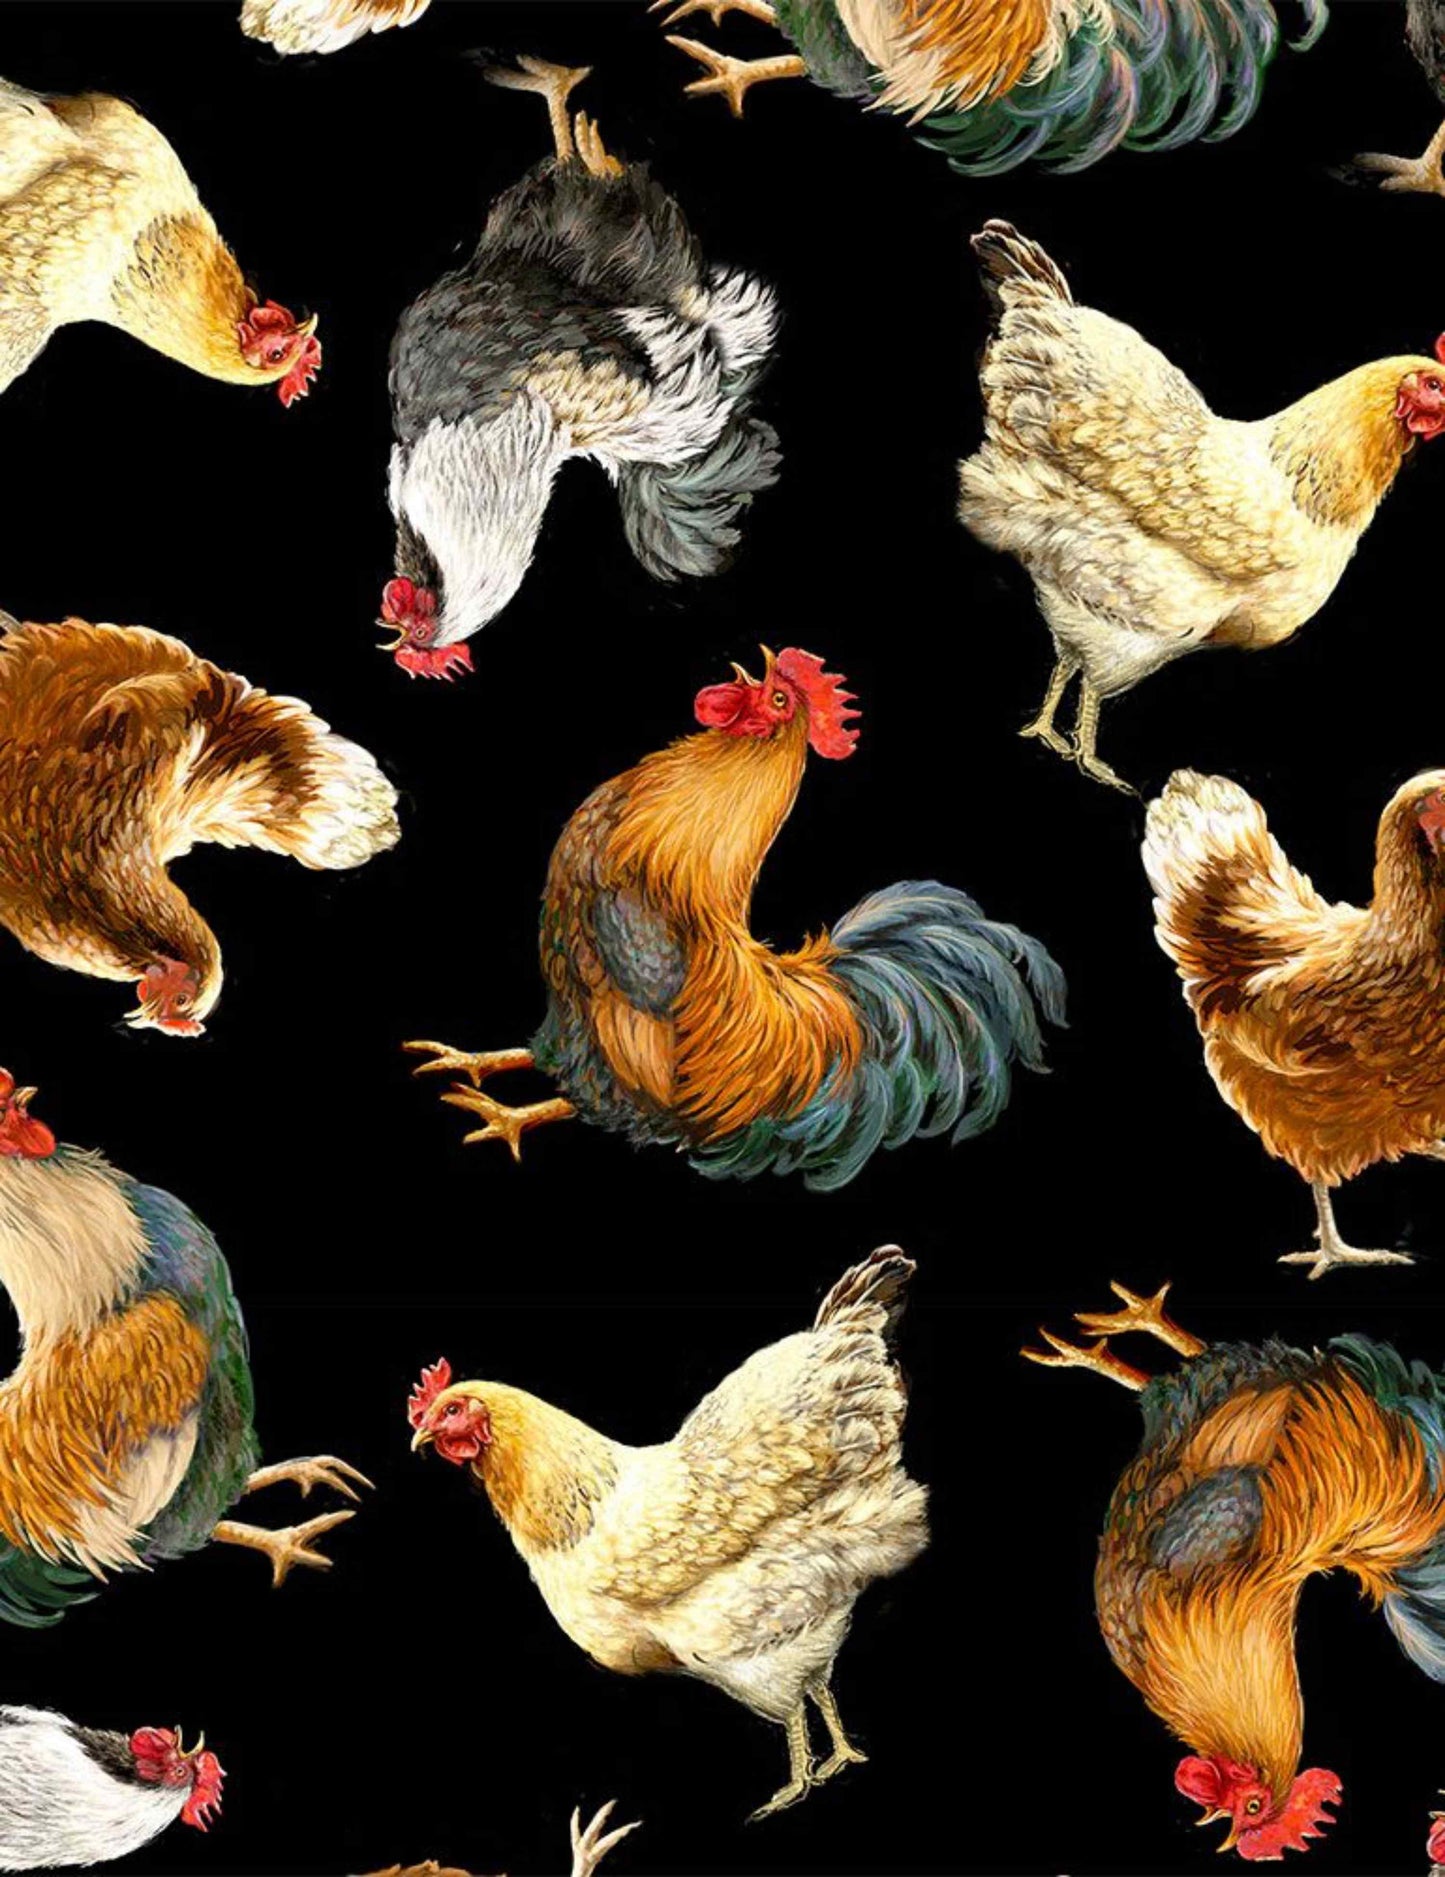 Fabric By The Yard - Tossed Chickens - DONA-C8339 - Black - Timeless Treasures